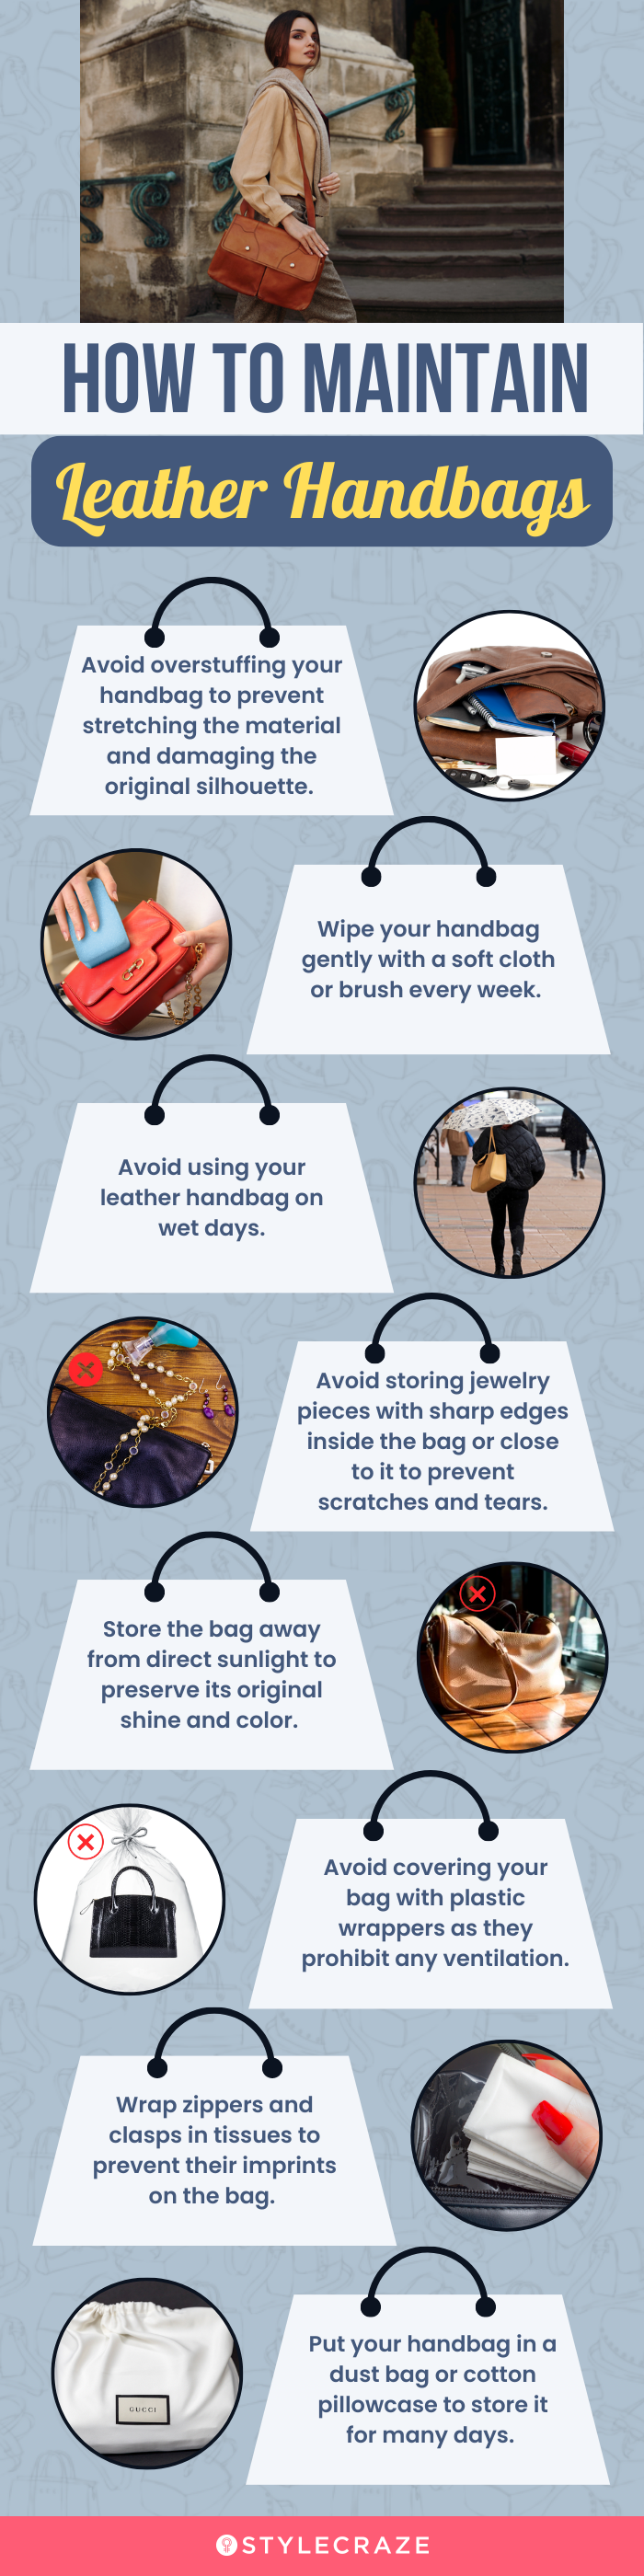 How To Maintain Leather Handbags (infographic)